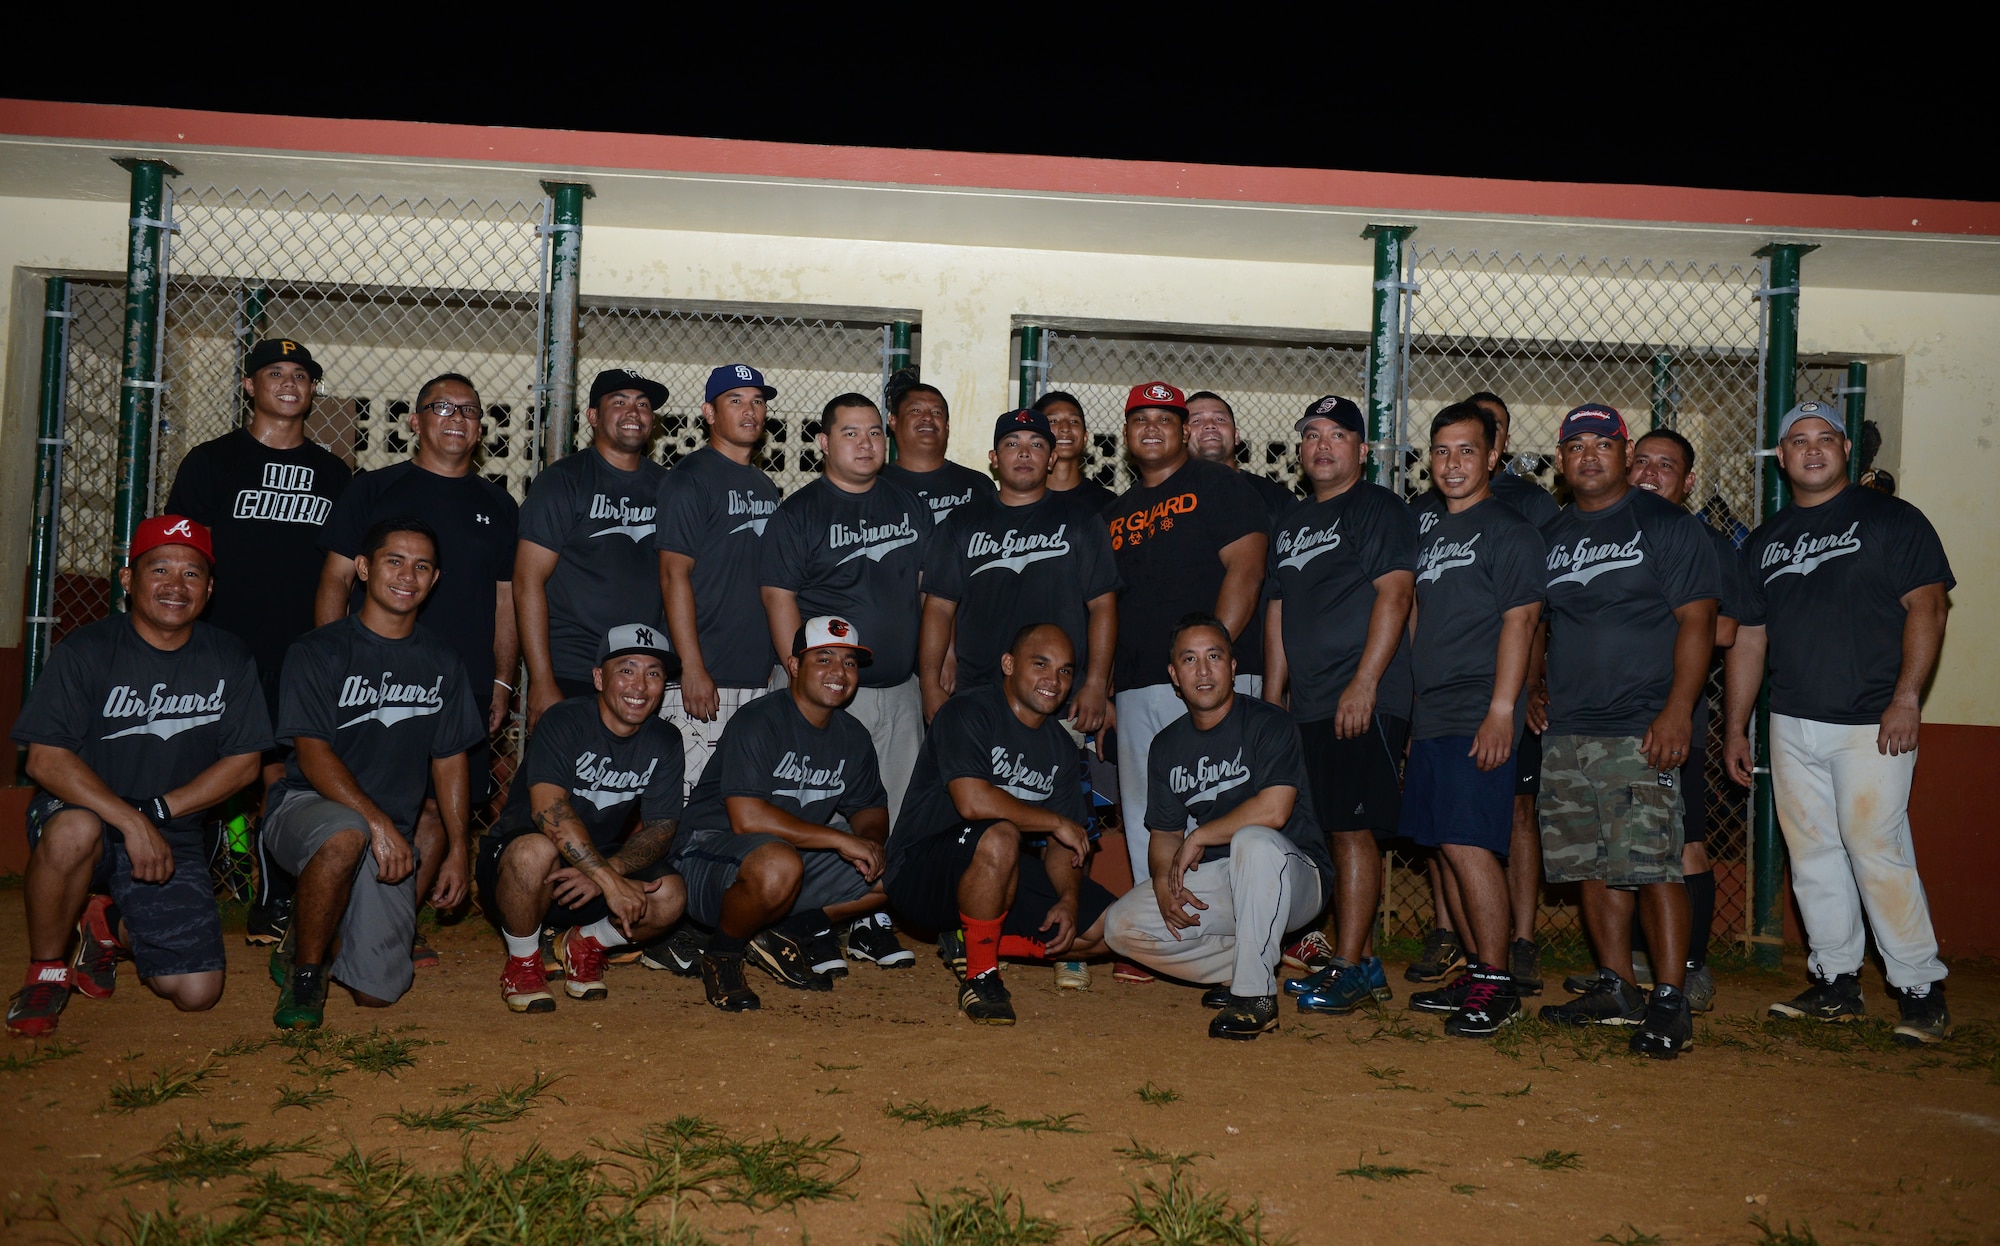 The 254th Air National Guard stands for a team photo at the end of the intramural softball game between the 36th Civil Engineer Squadron and Guam ANG July 28, 2015, at Andersen Air Force Base, Guam. The GU ANG won the game with a score of 16-12. (U.S. Air Force photo by Airman 1st Class Arielle Vasquez/Released)